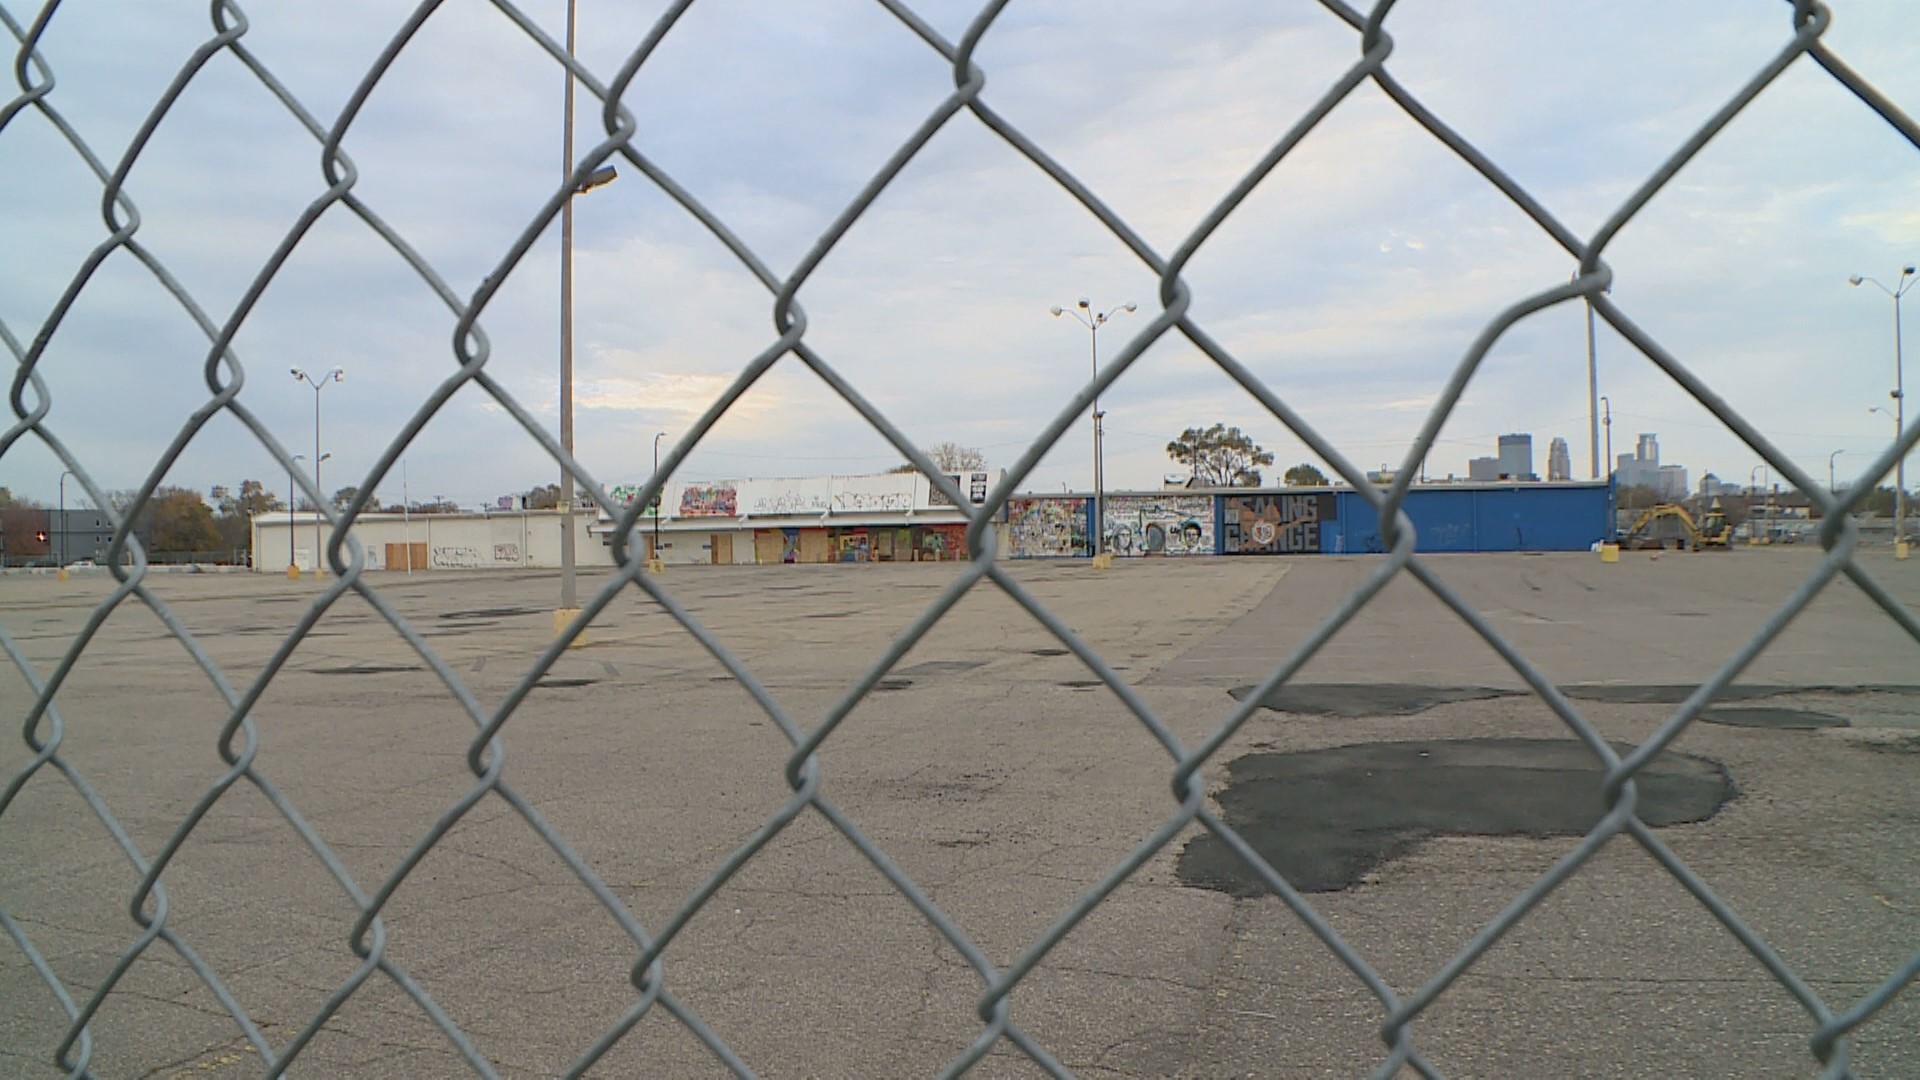 After a large fire destroyed part of the vacant Kmart building, city leaders accelerated the plan to demolish the building and reconnect the surrounding roads.